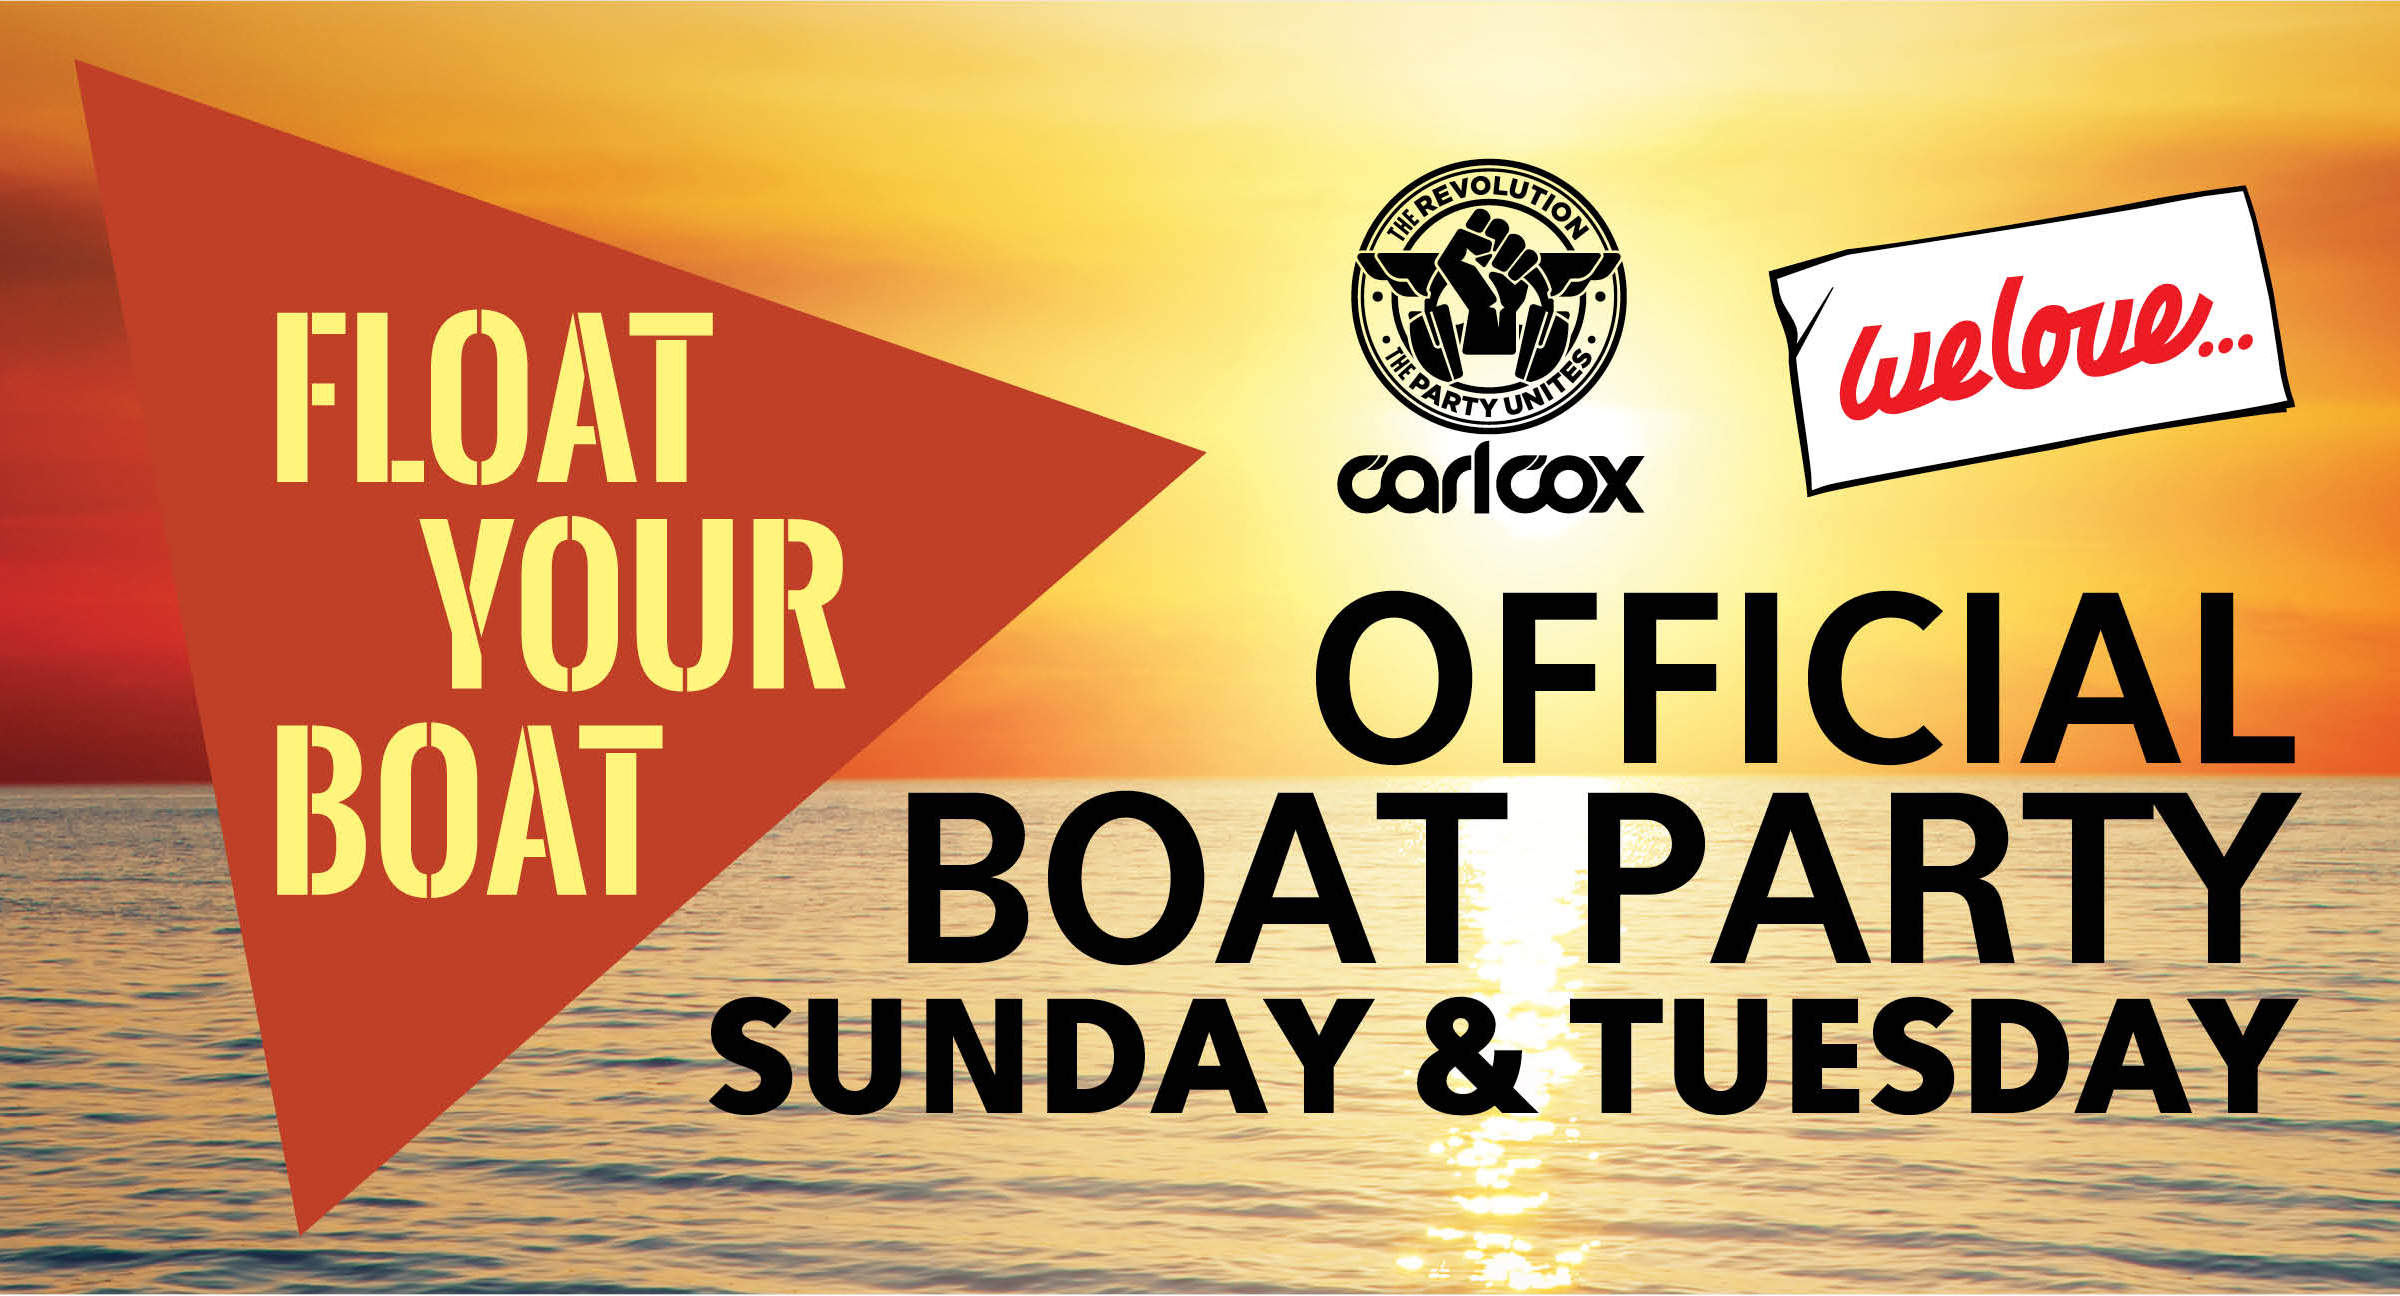 Float Your Boat_Carl Cox_2014_1